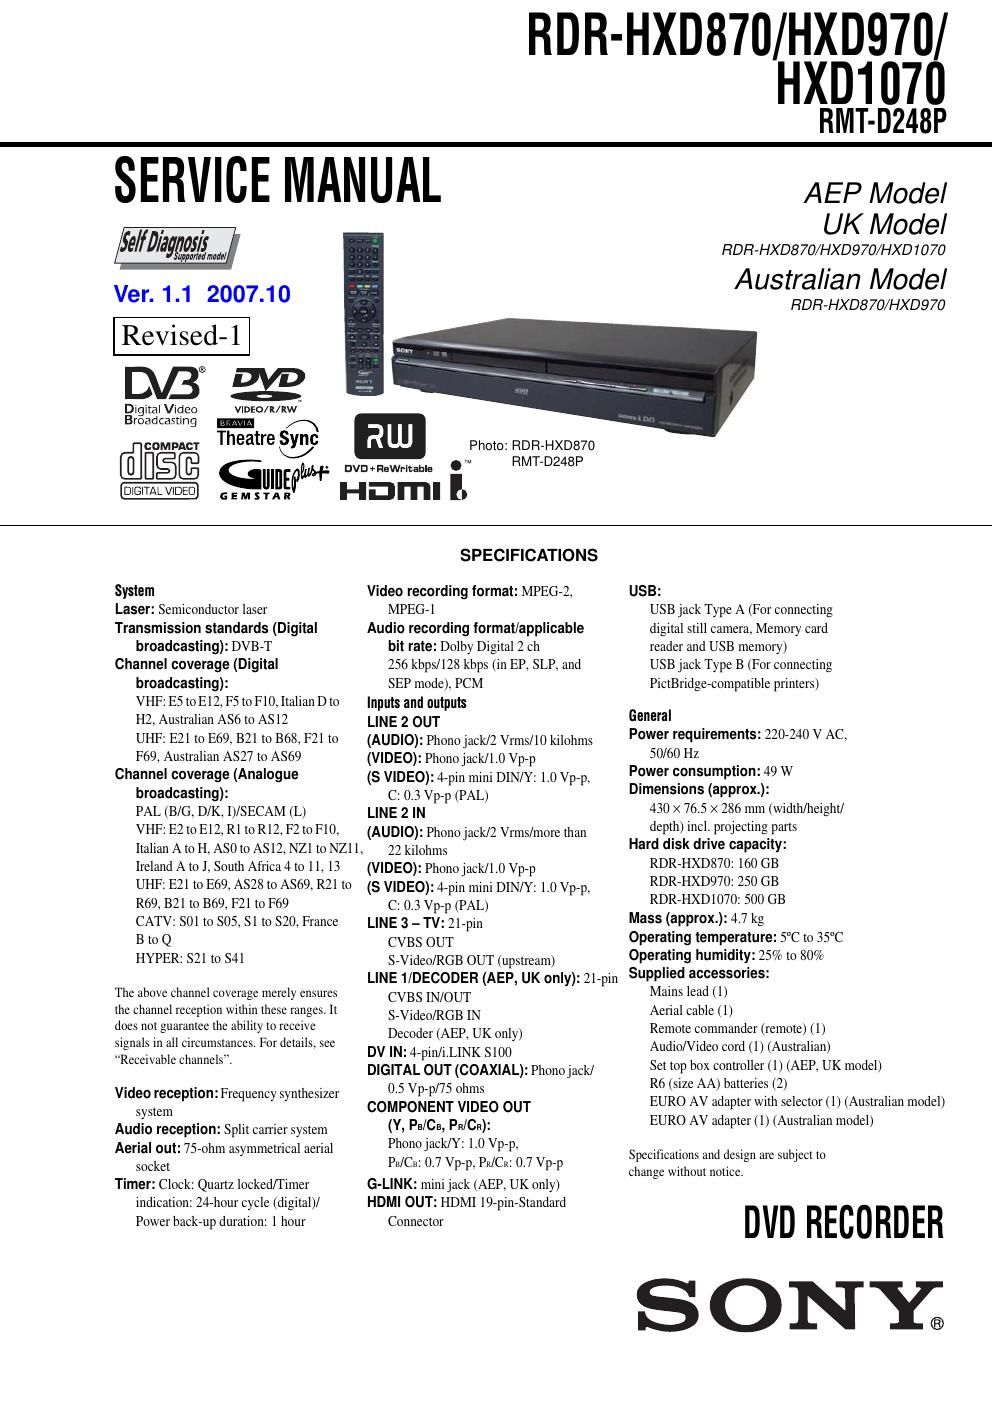 sony rdr hxd 870 service manual